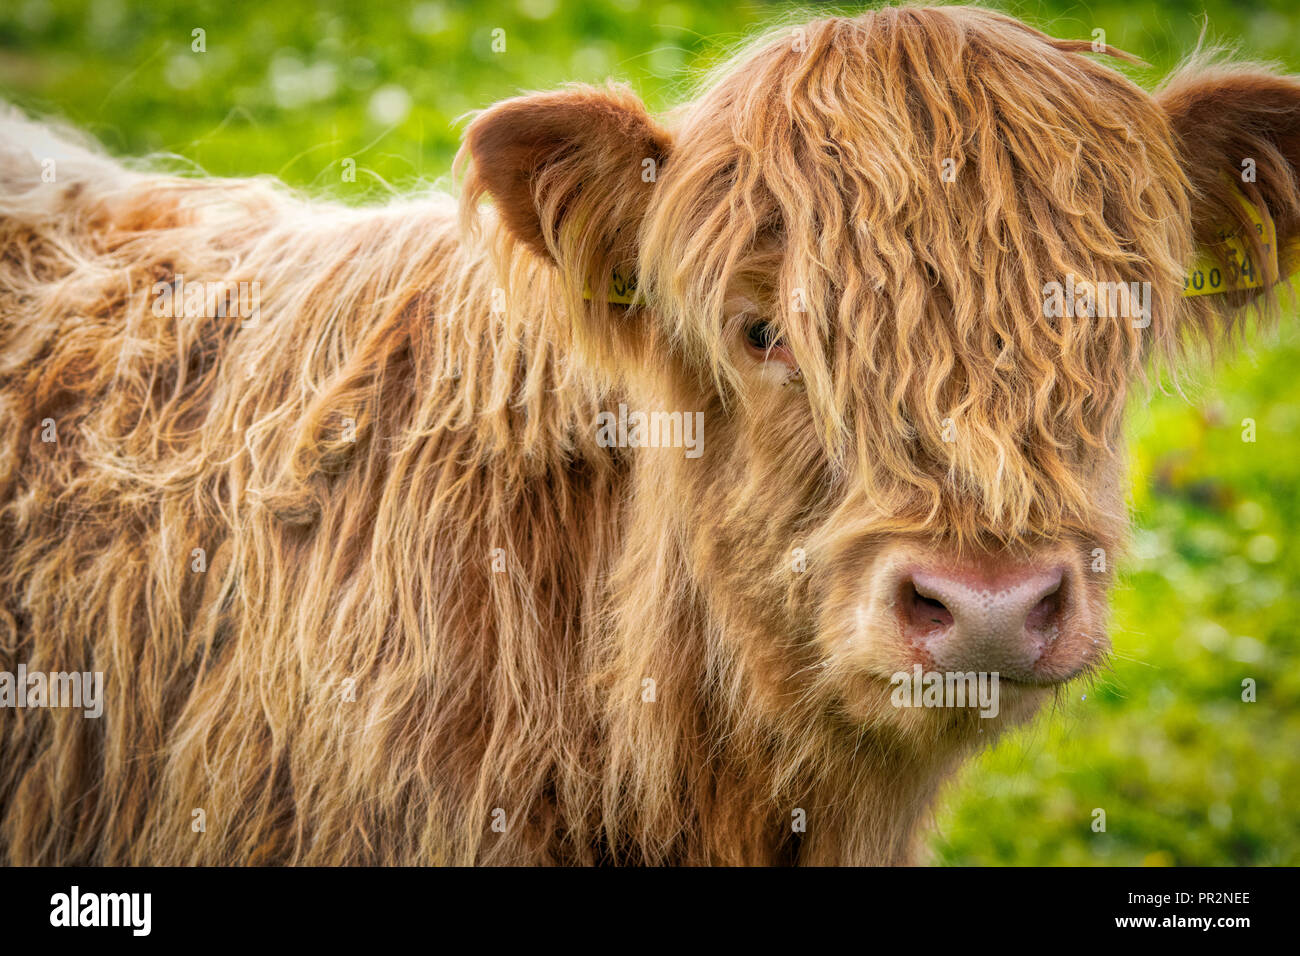 Portrait of a blonde Highland Cow (heilan coo) with its long fur and a green and yellow grassy background Stock Photo